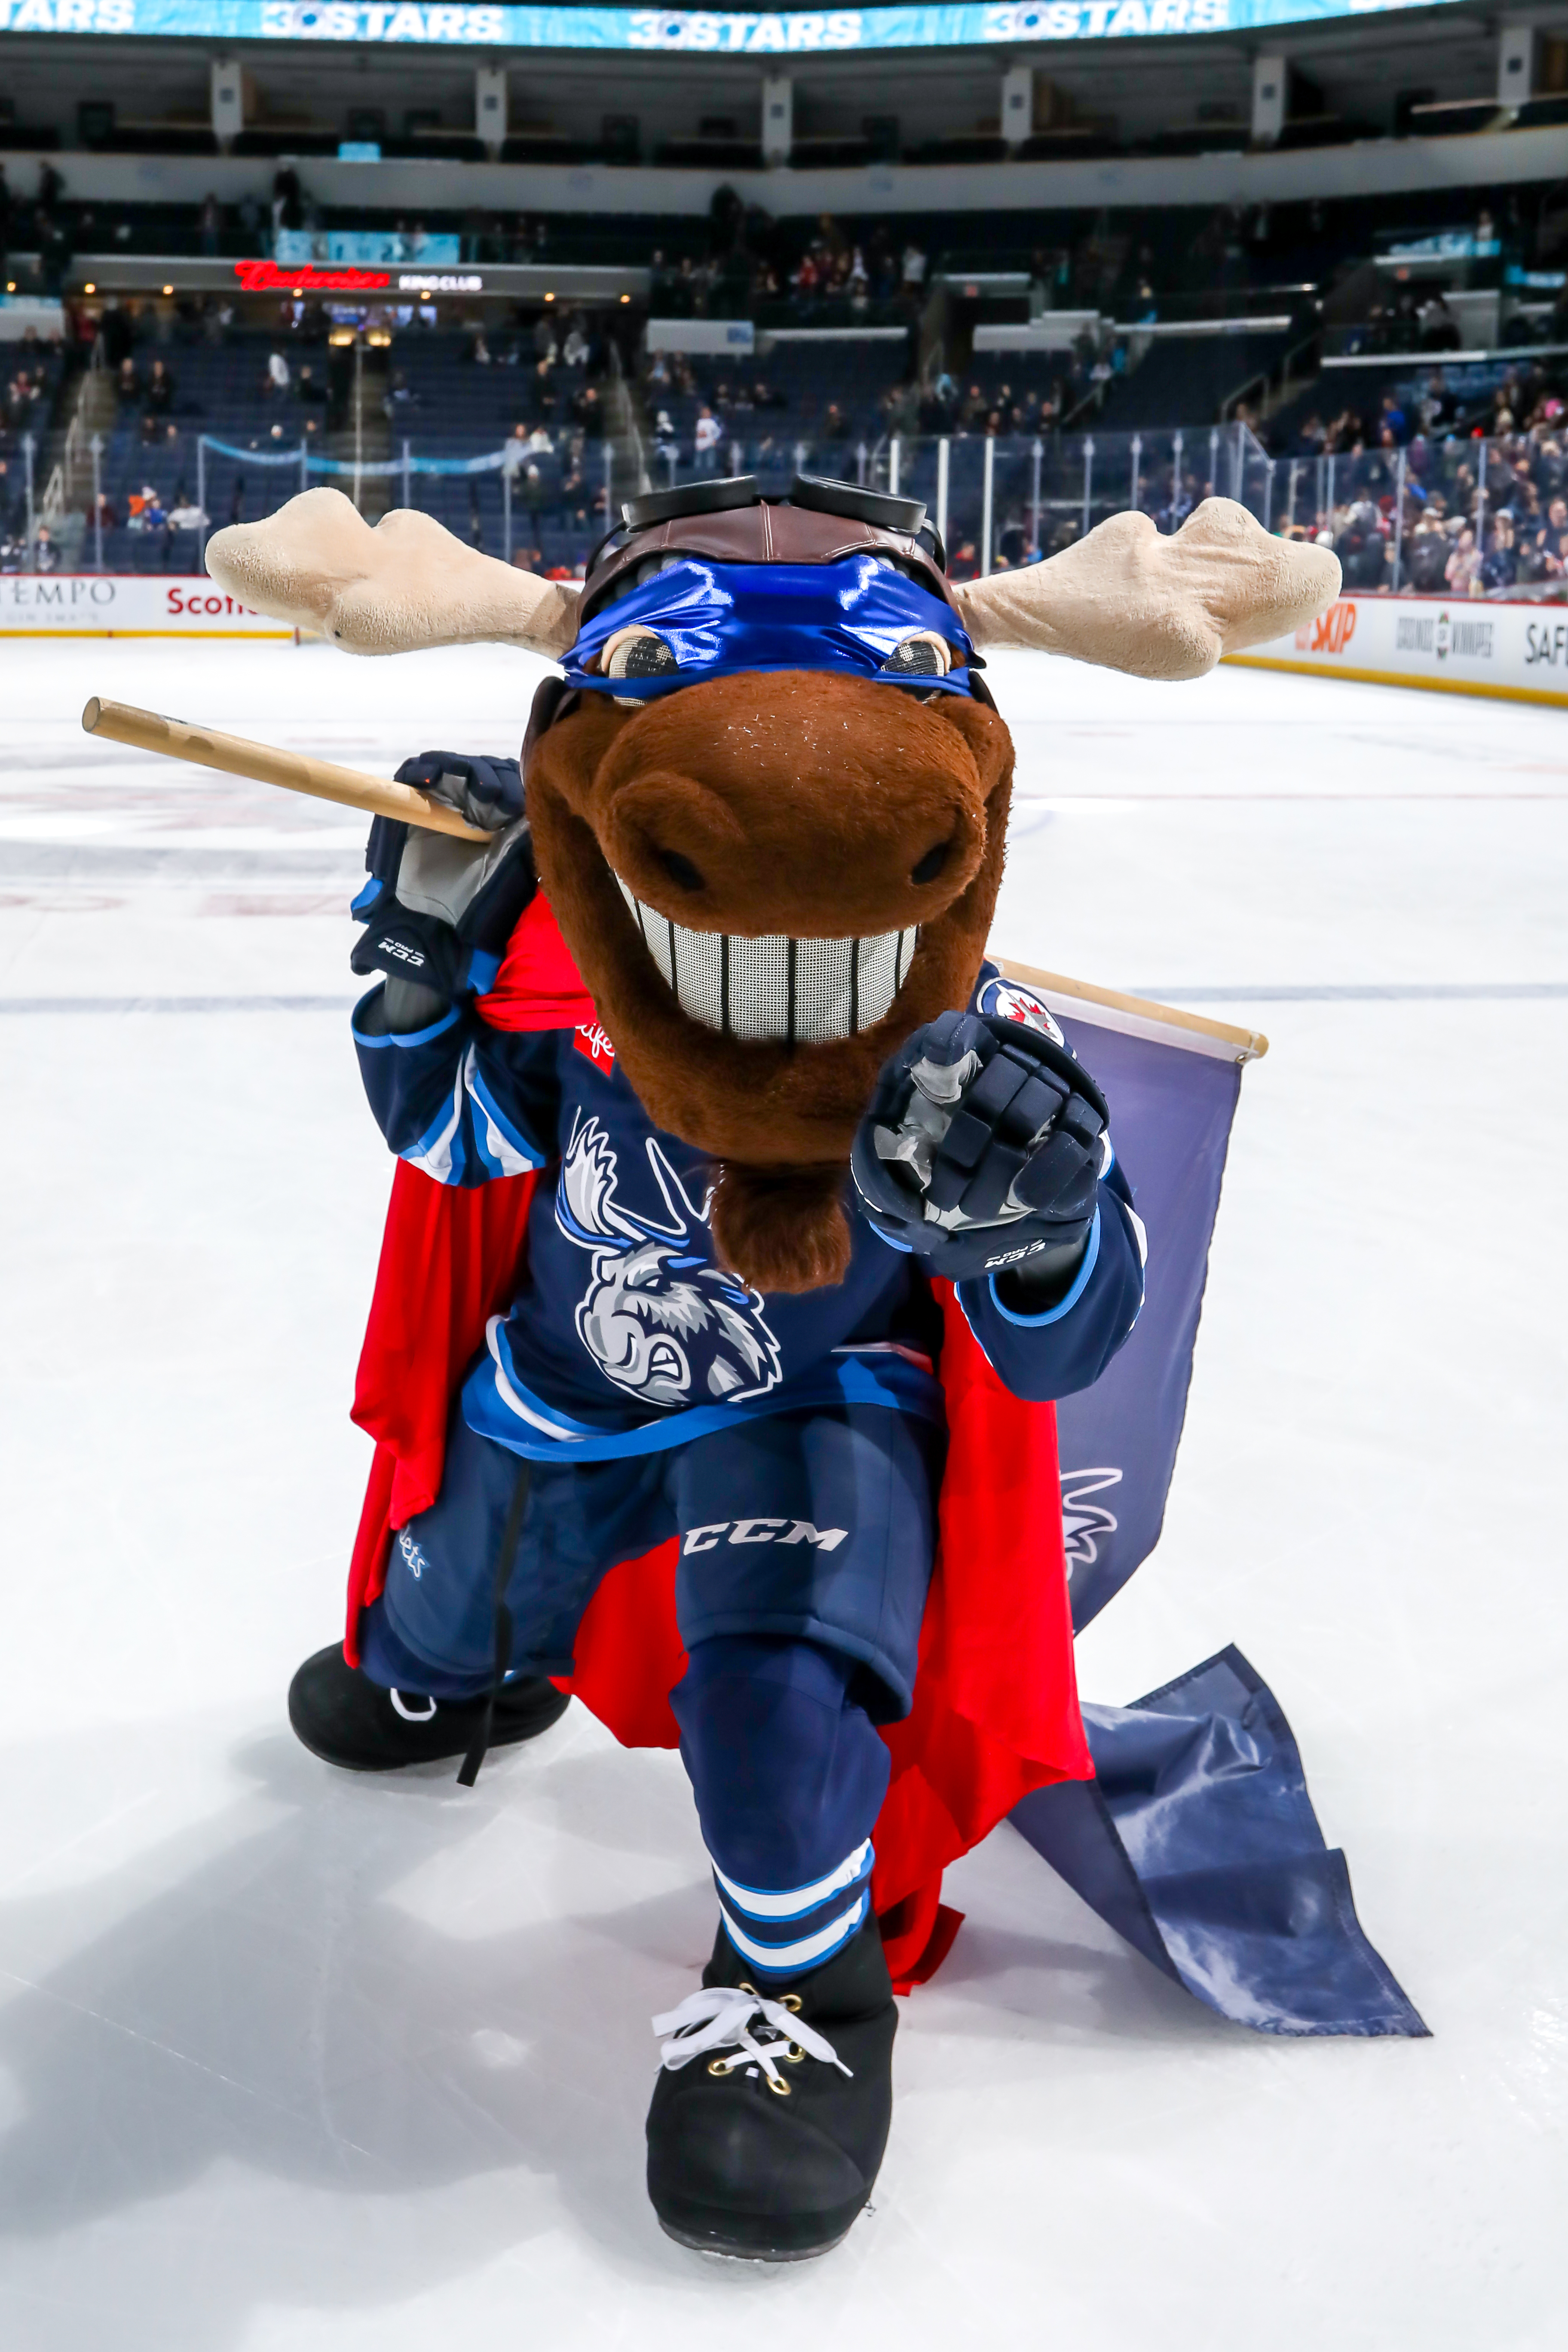 How the Manitoba Moose and Camp Quality Manitoba are fighting cancer